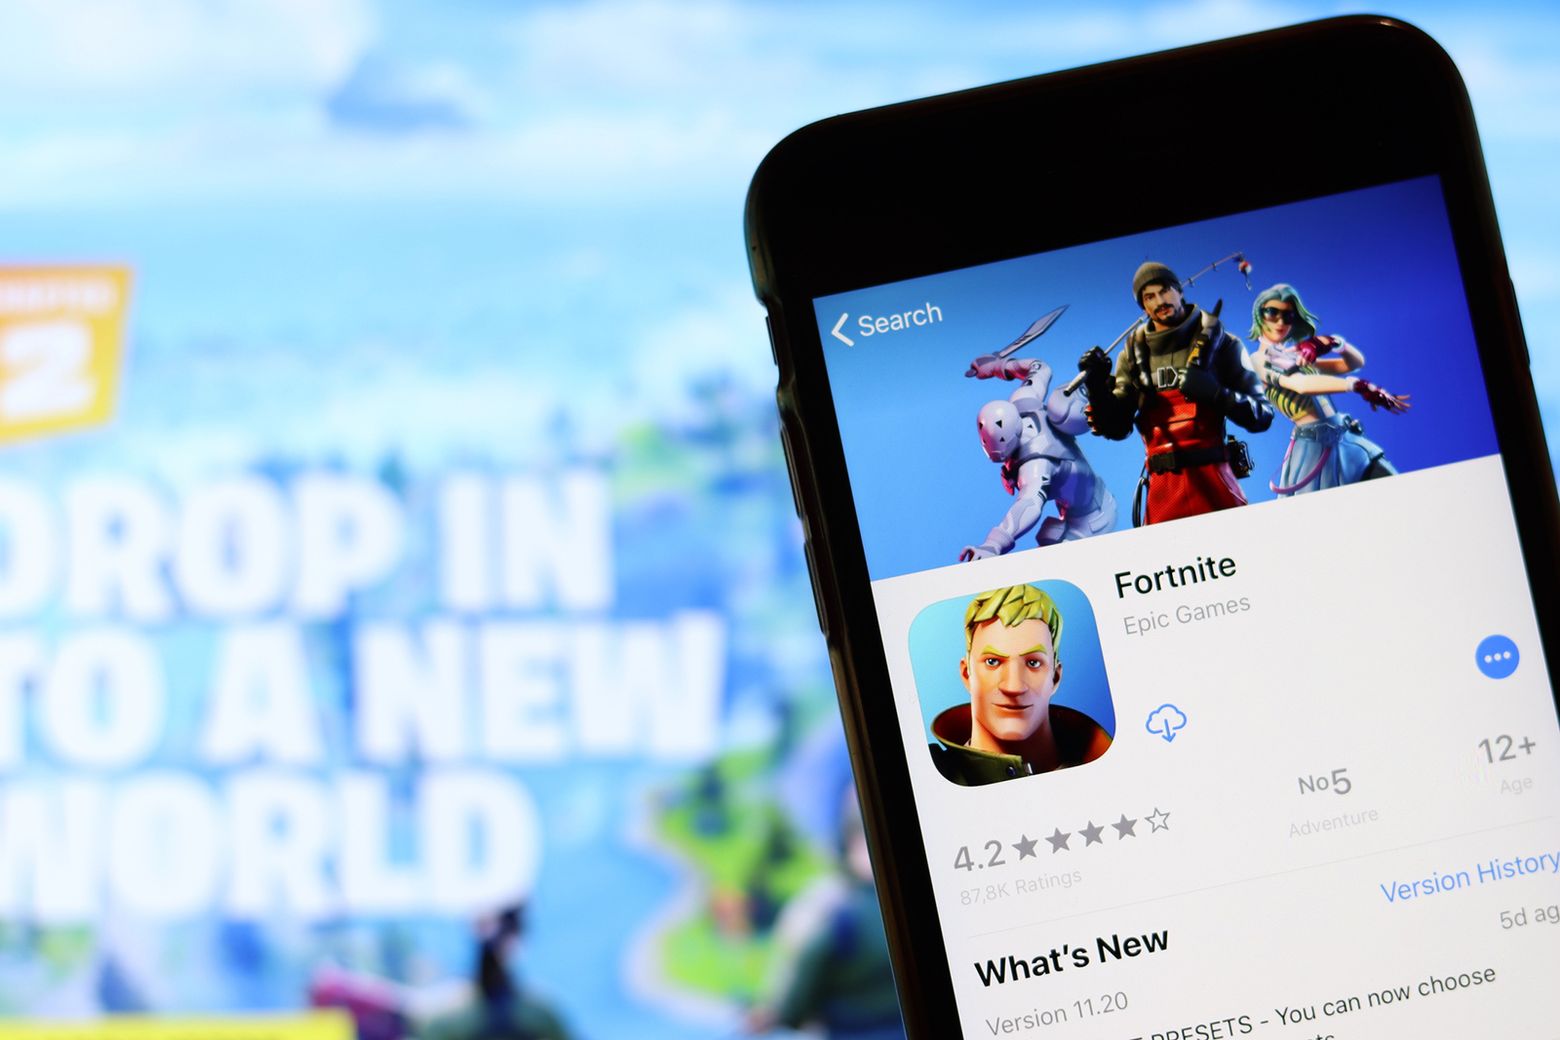 Epic Games Loses Again in Battle With Apple Over App Store Rules